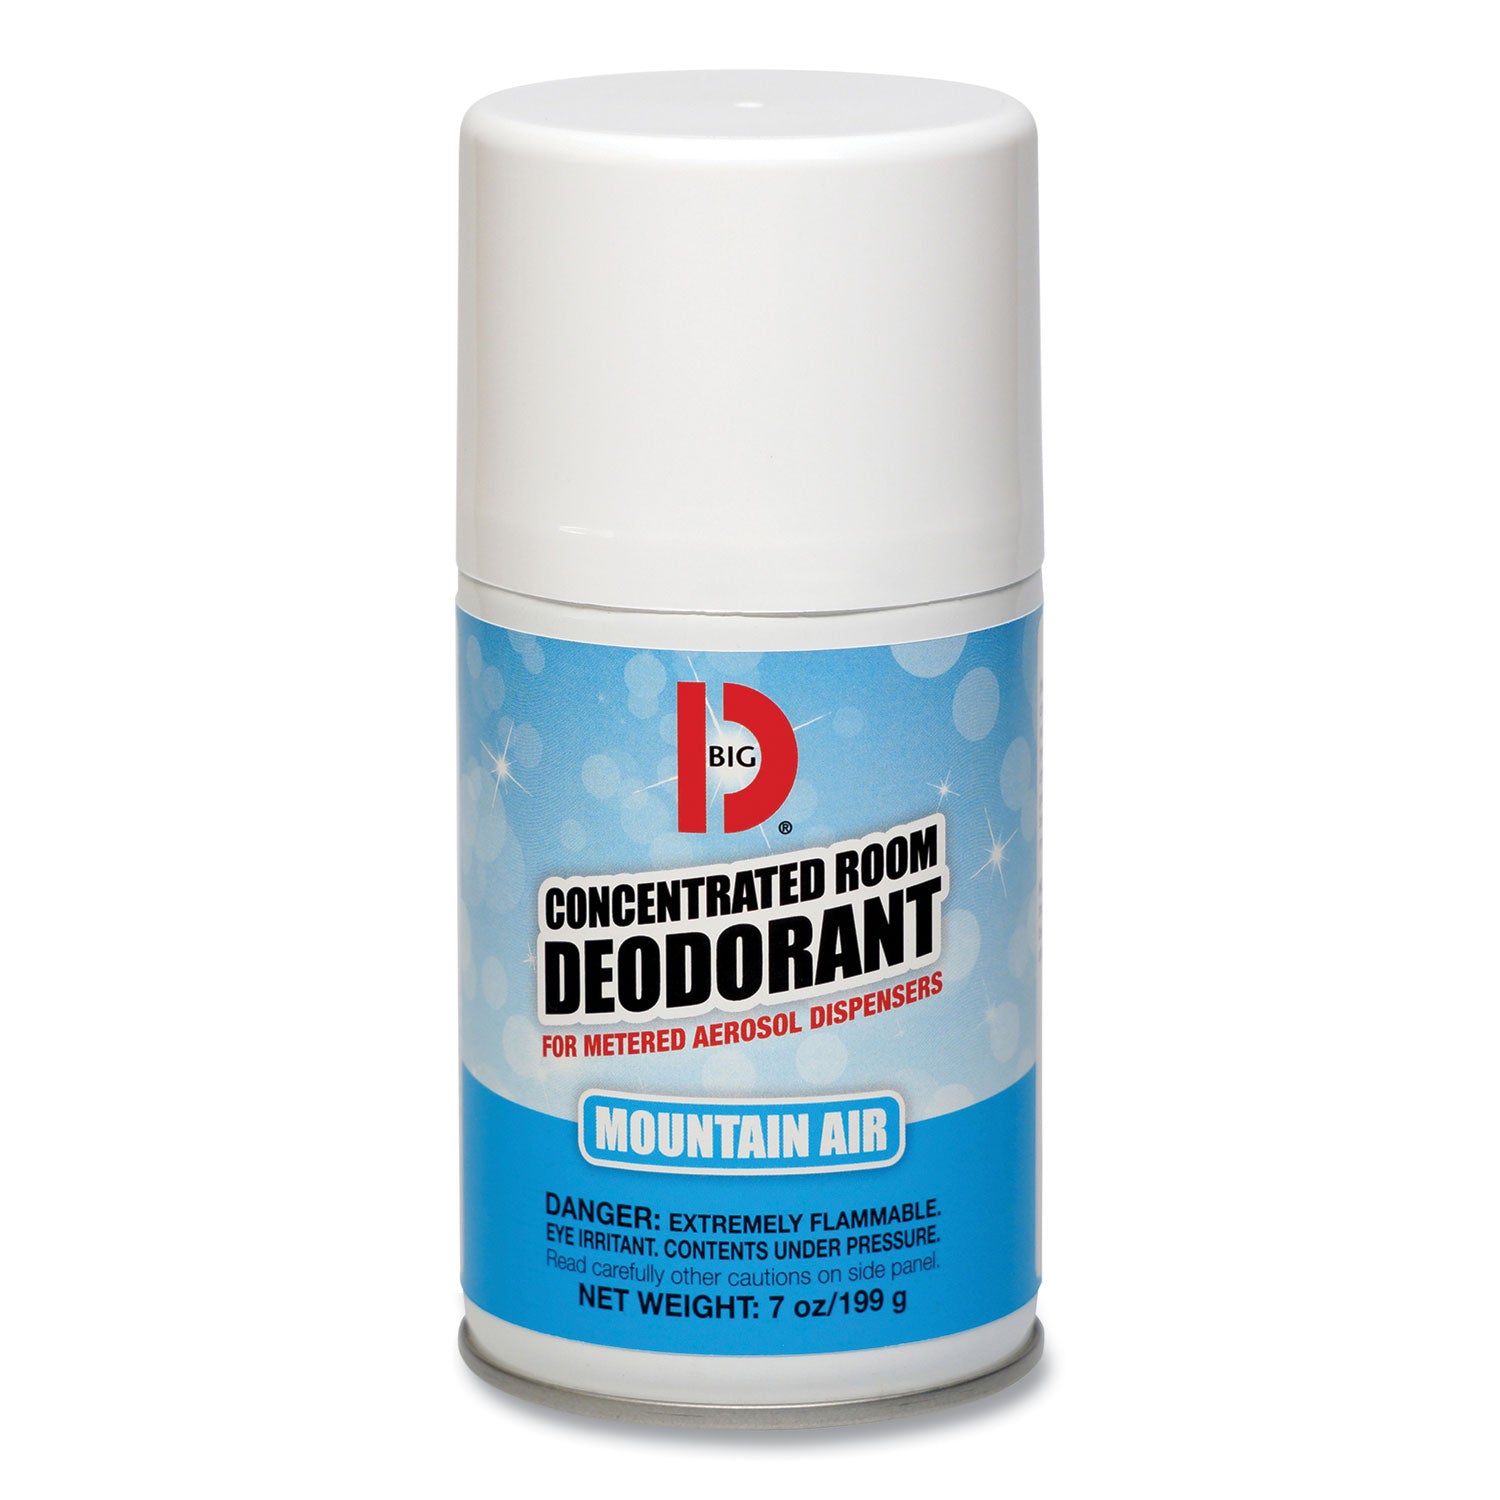 metered-concentrated-room-deodorant-mountain-air-scent-7-oz-aerosol-spray-12-carton_bgd463 - 1